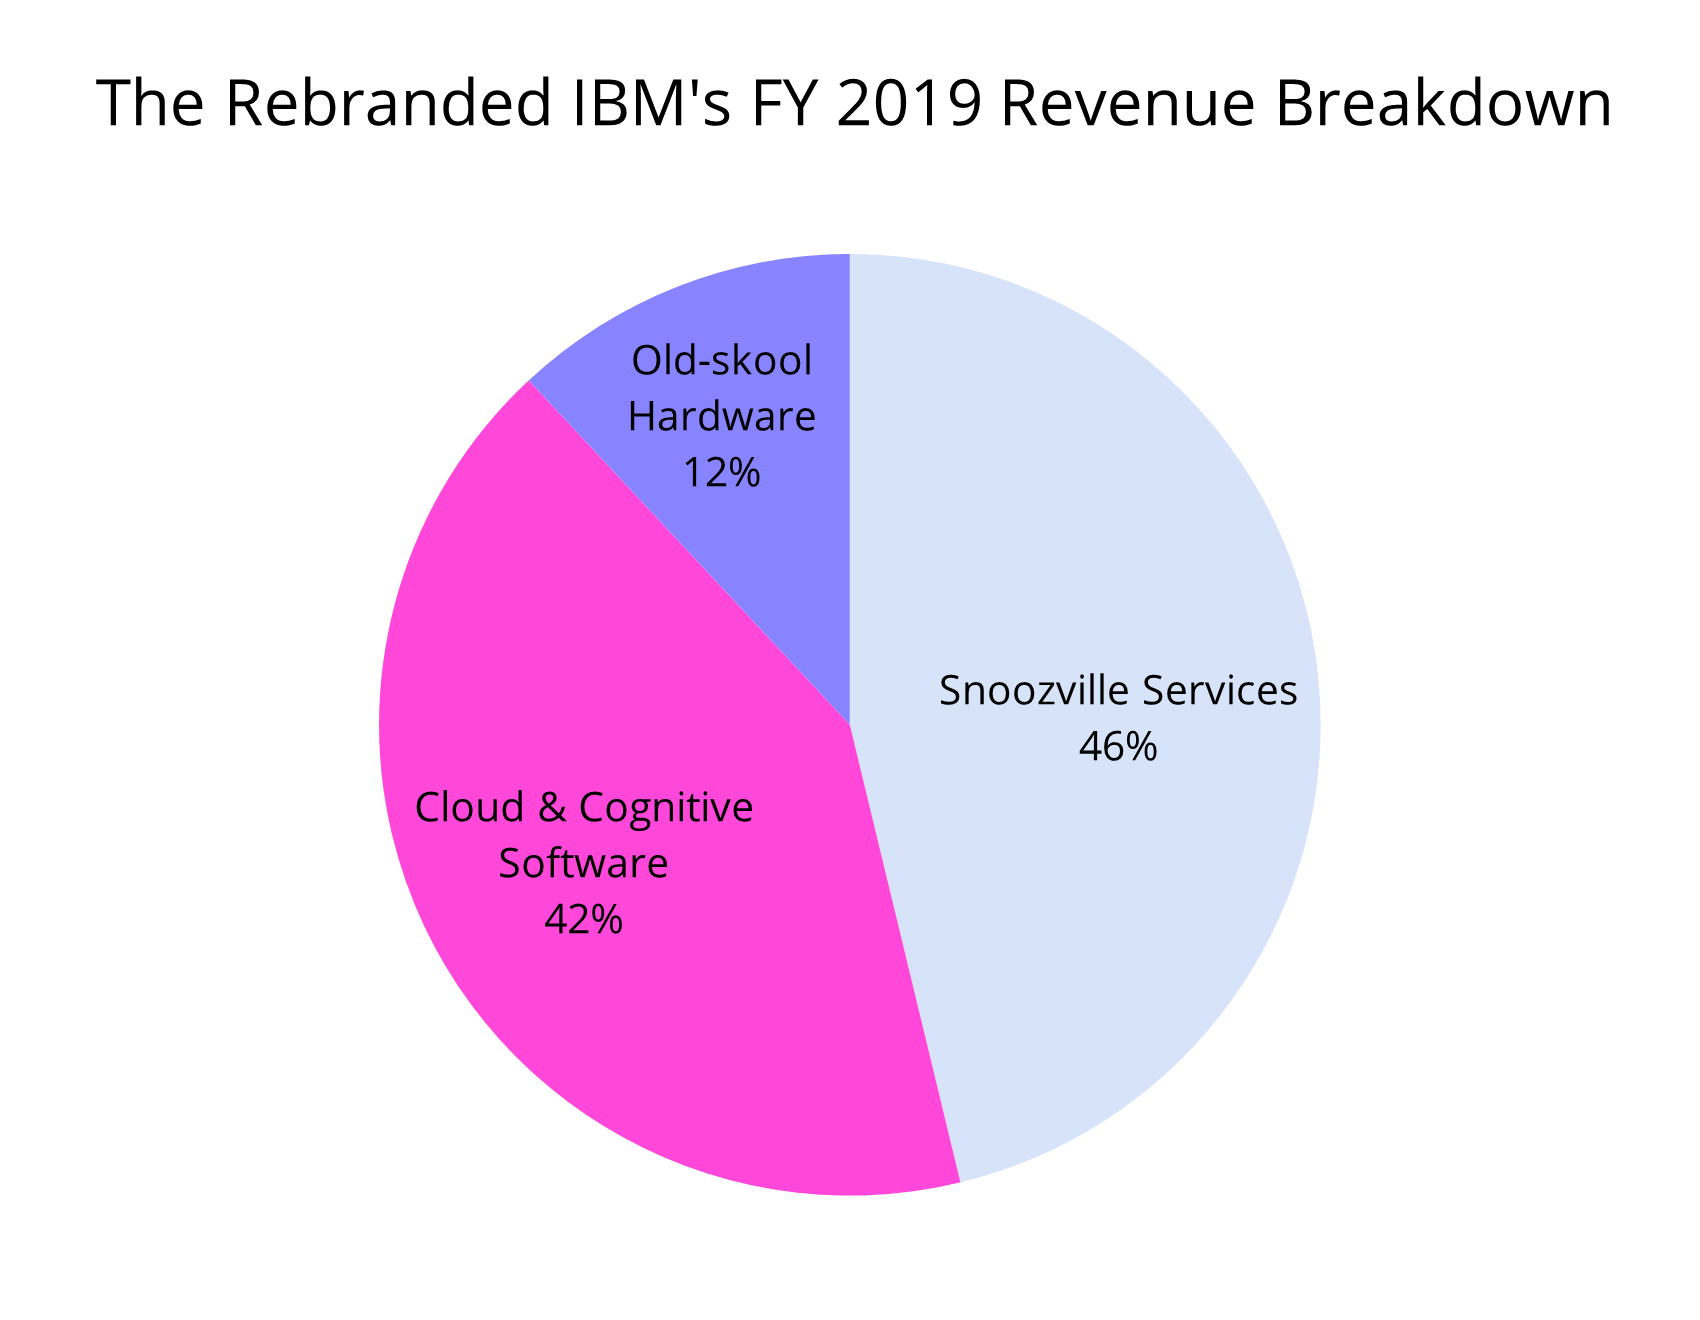 A pie chart showing the rebranded IBM&rsquo;s FY 2019 revenue breakdown. 46% for Snoozville Services, 42% for Cloud and Cognitive, 12% for Old-skool Hardware.